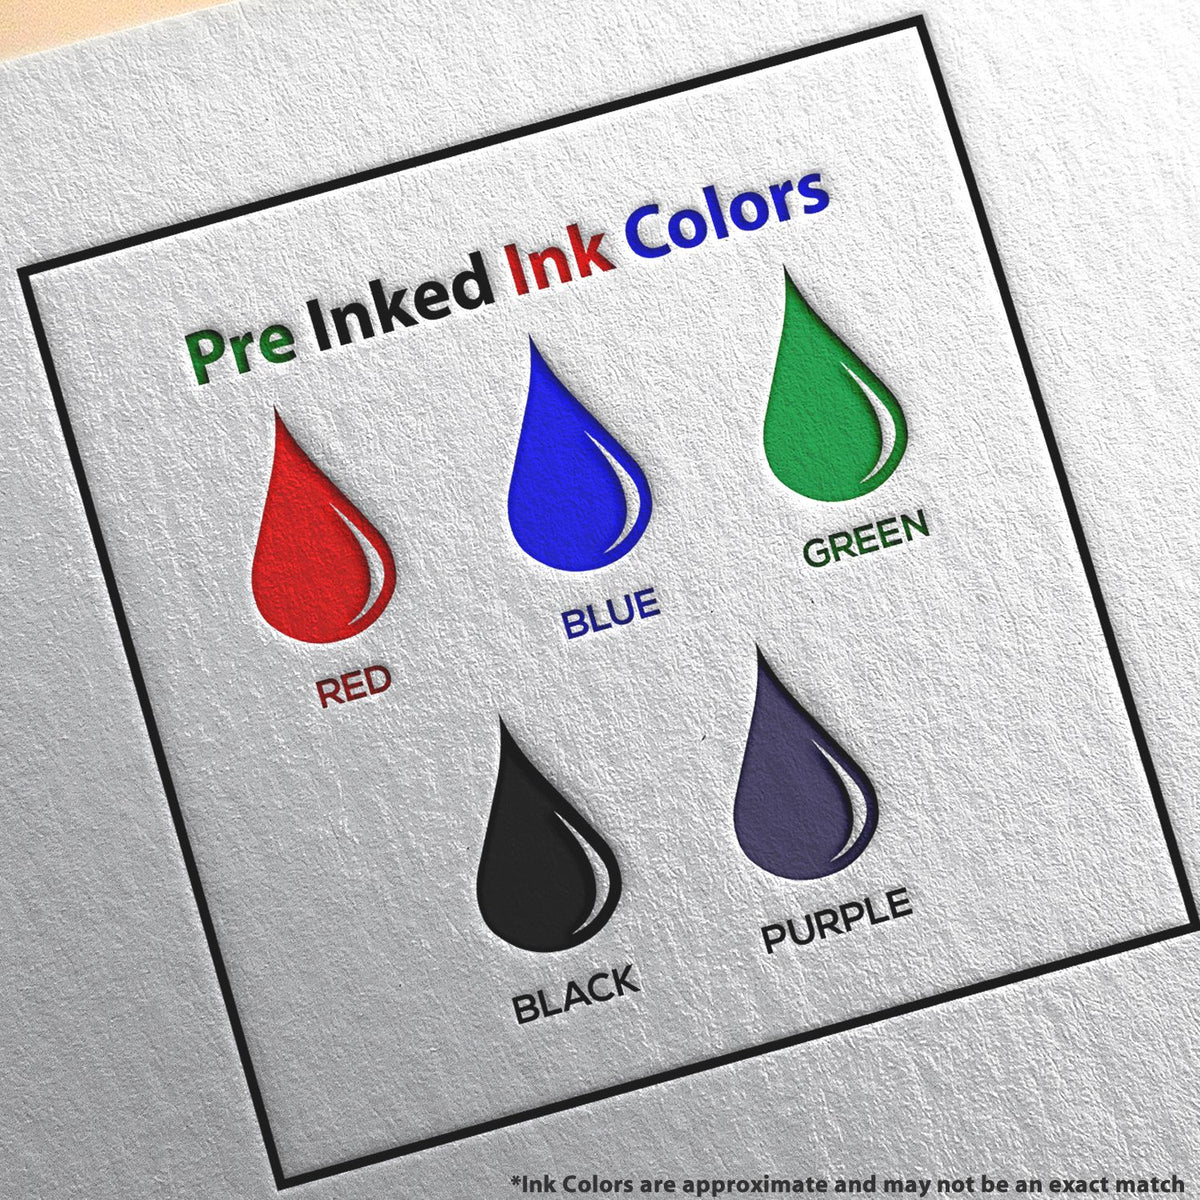 A picture showing the different ink colors or hues available for the Premium MaxLight Pre-Inked Wisconsin Geology Stamp